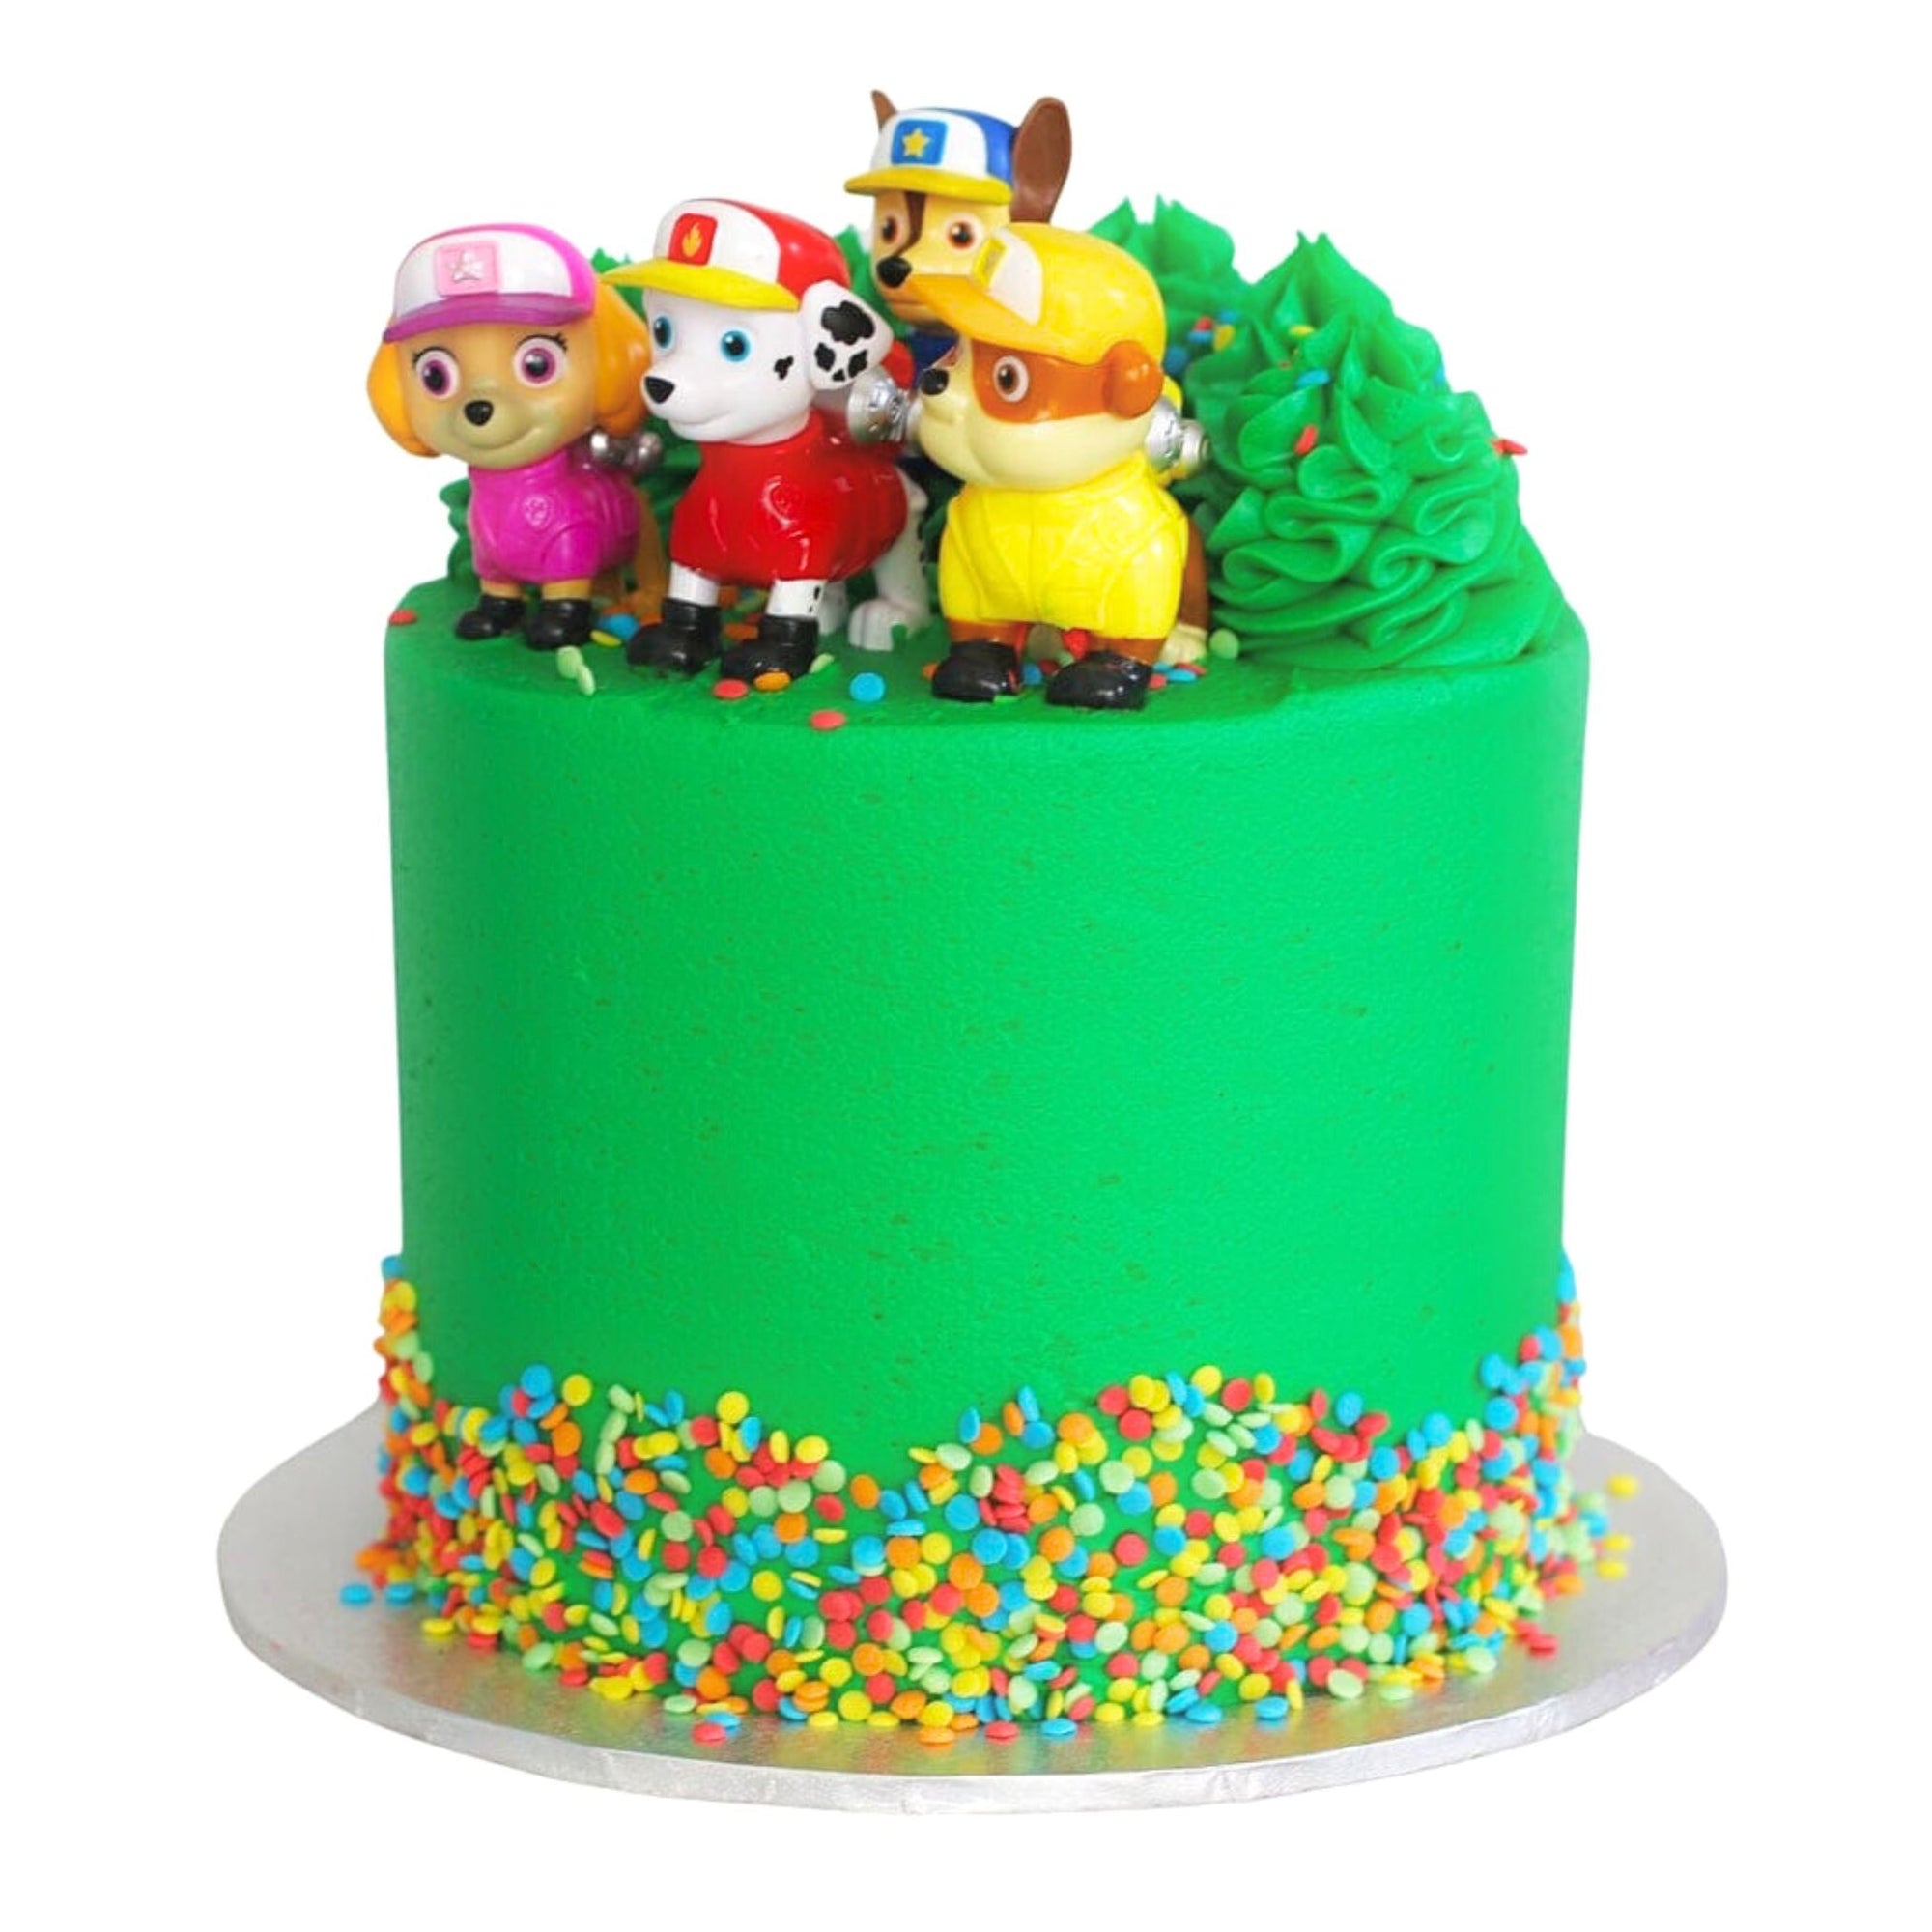 Paw Patrol Cake - The Cupcake Queens 